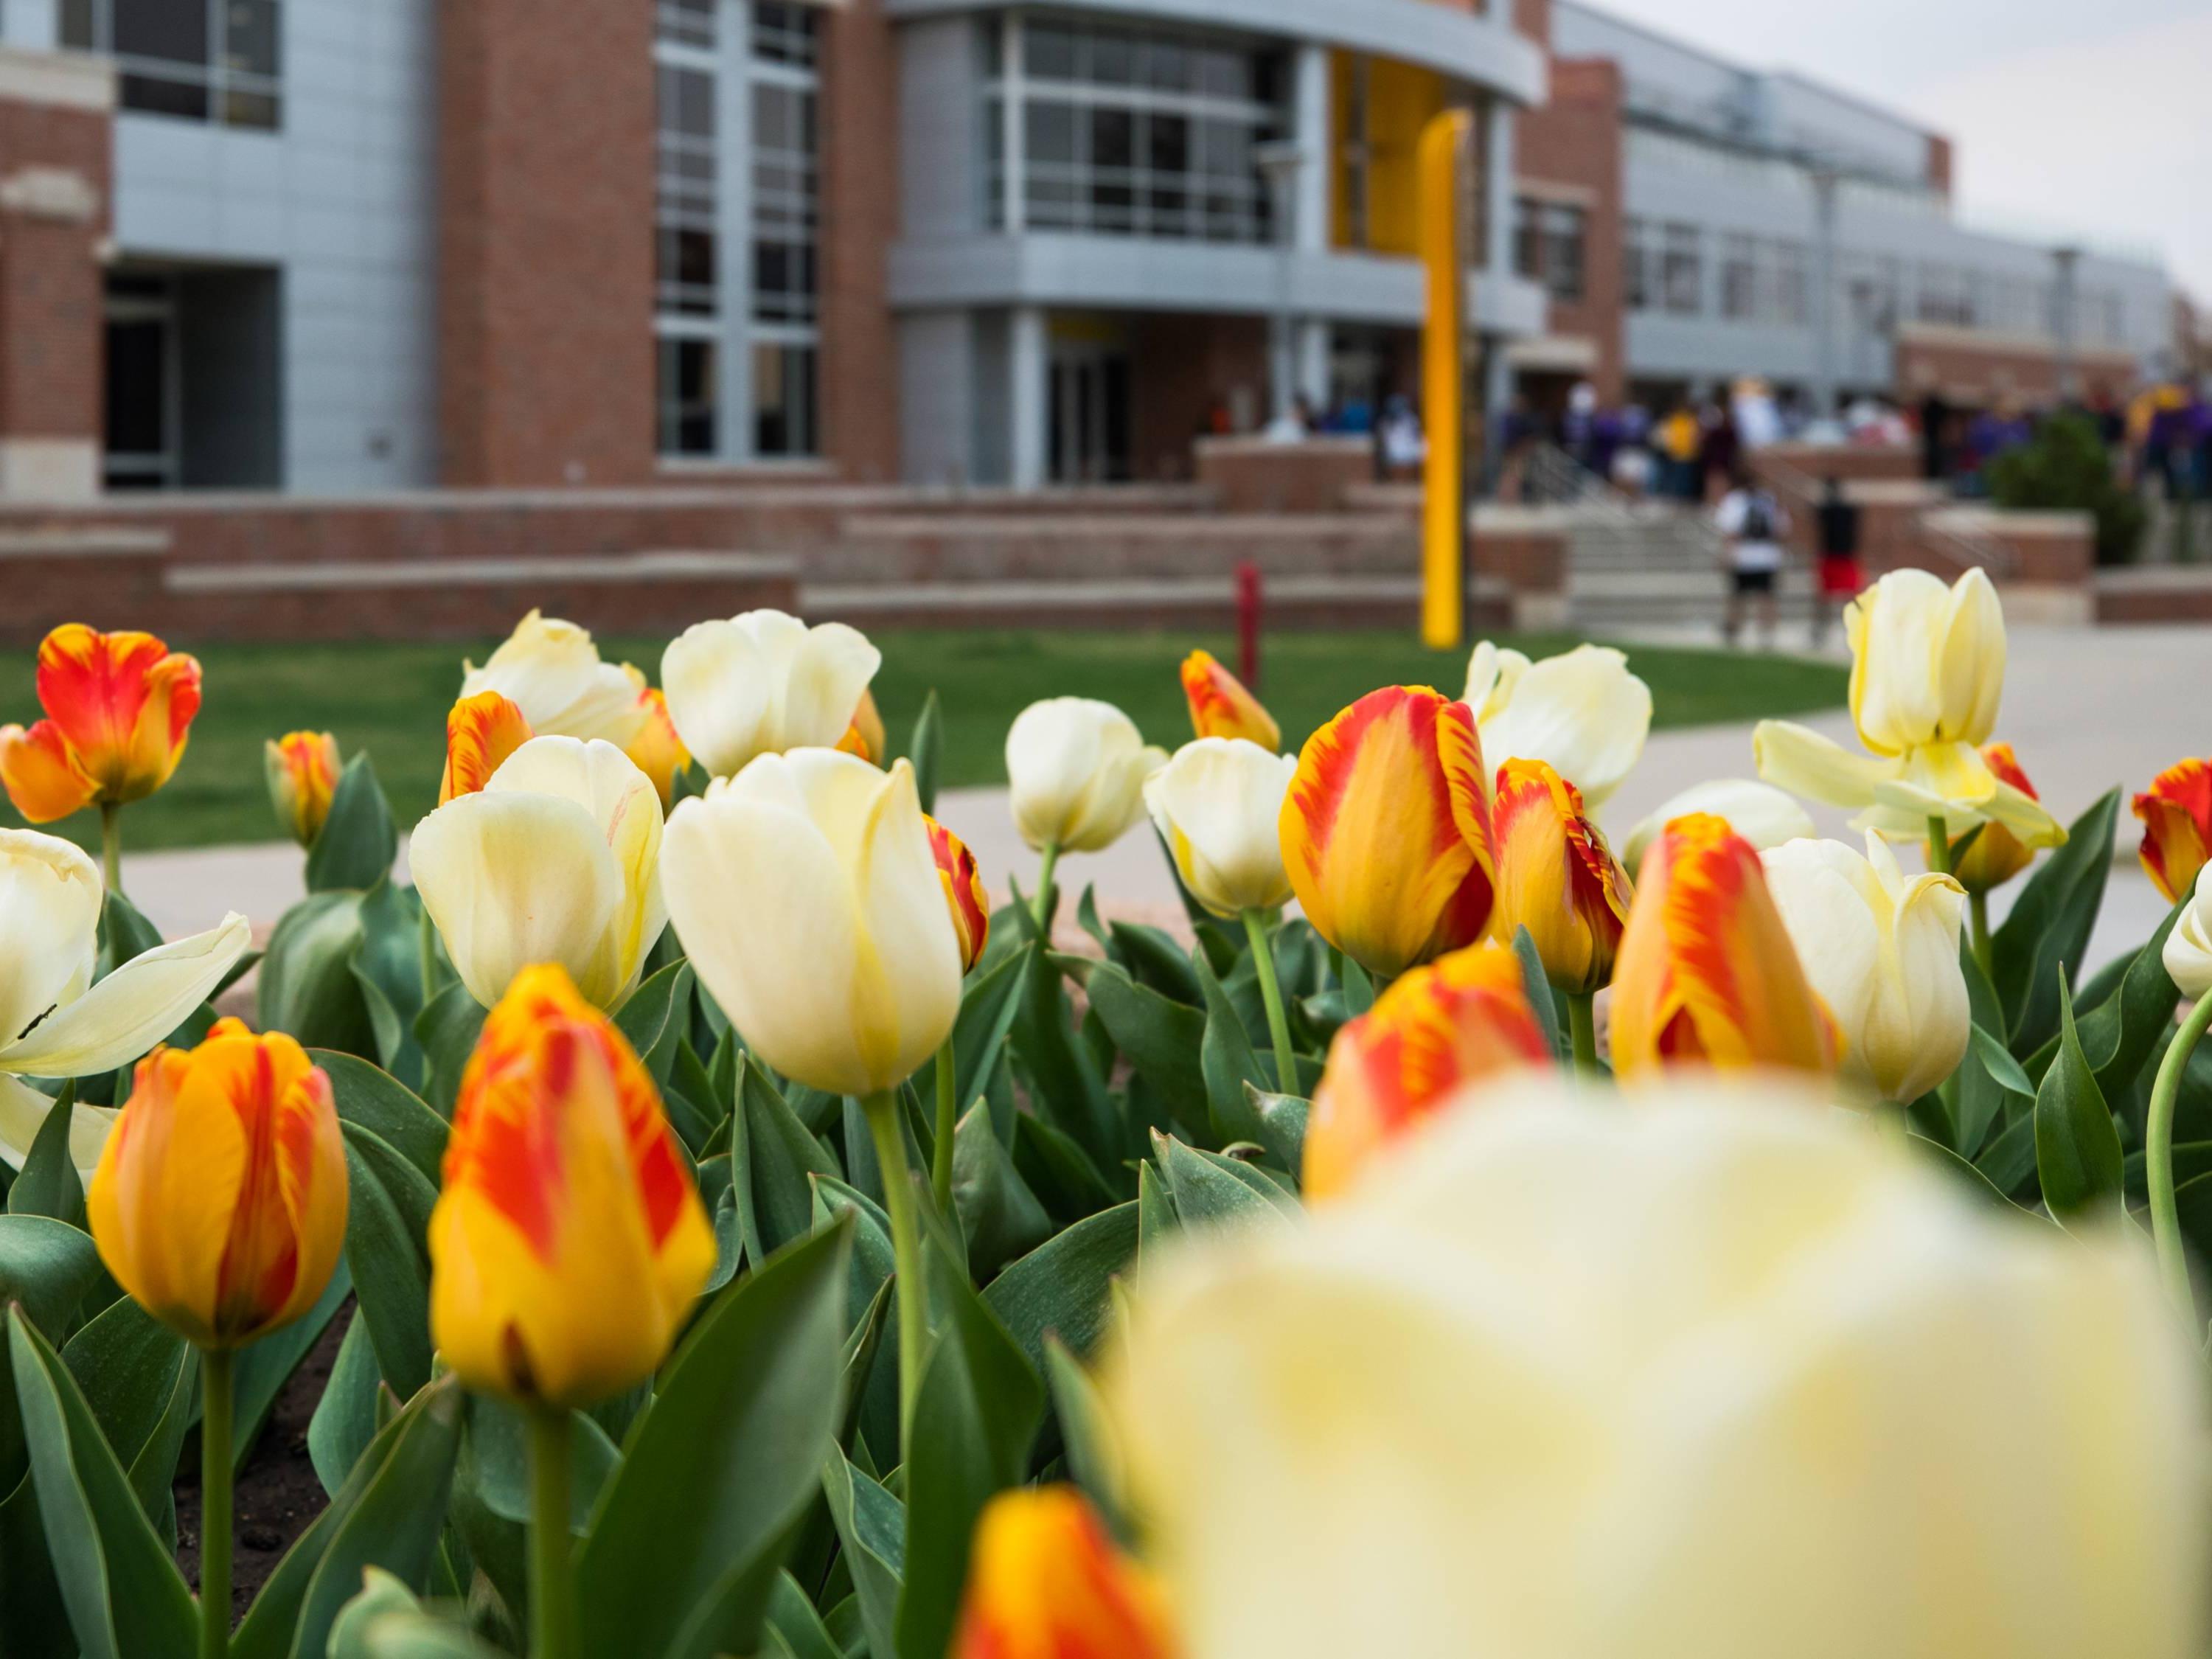 Tulips in front of the Rhatigan Student Center.